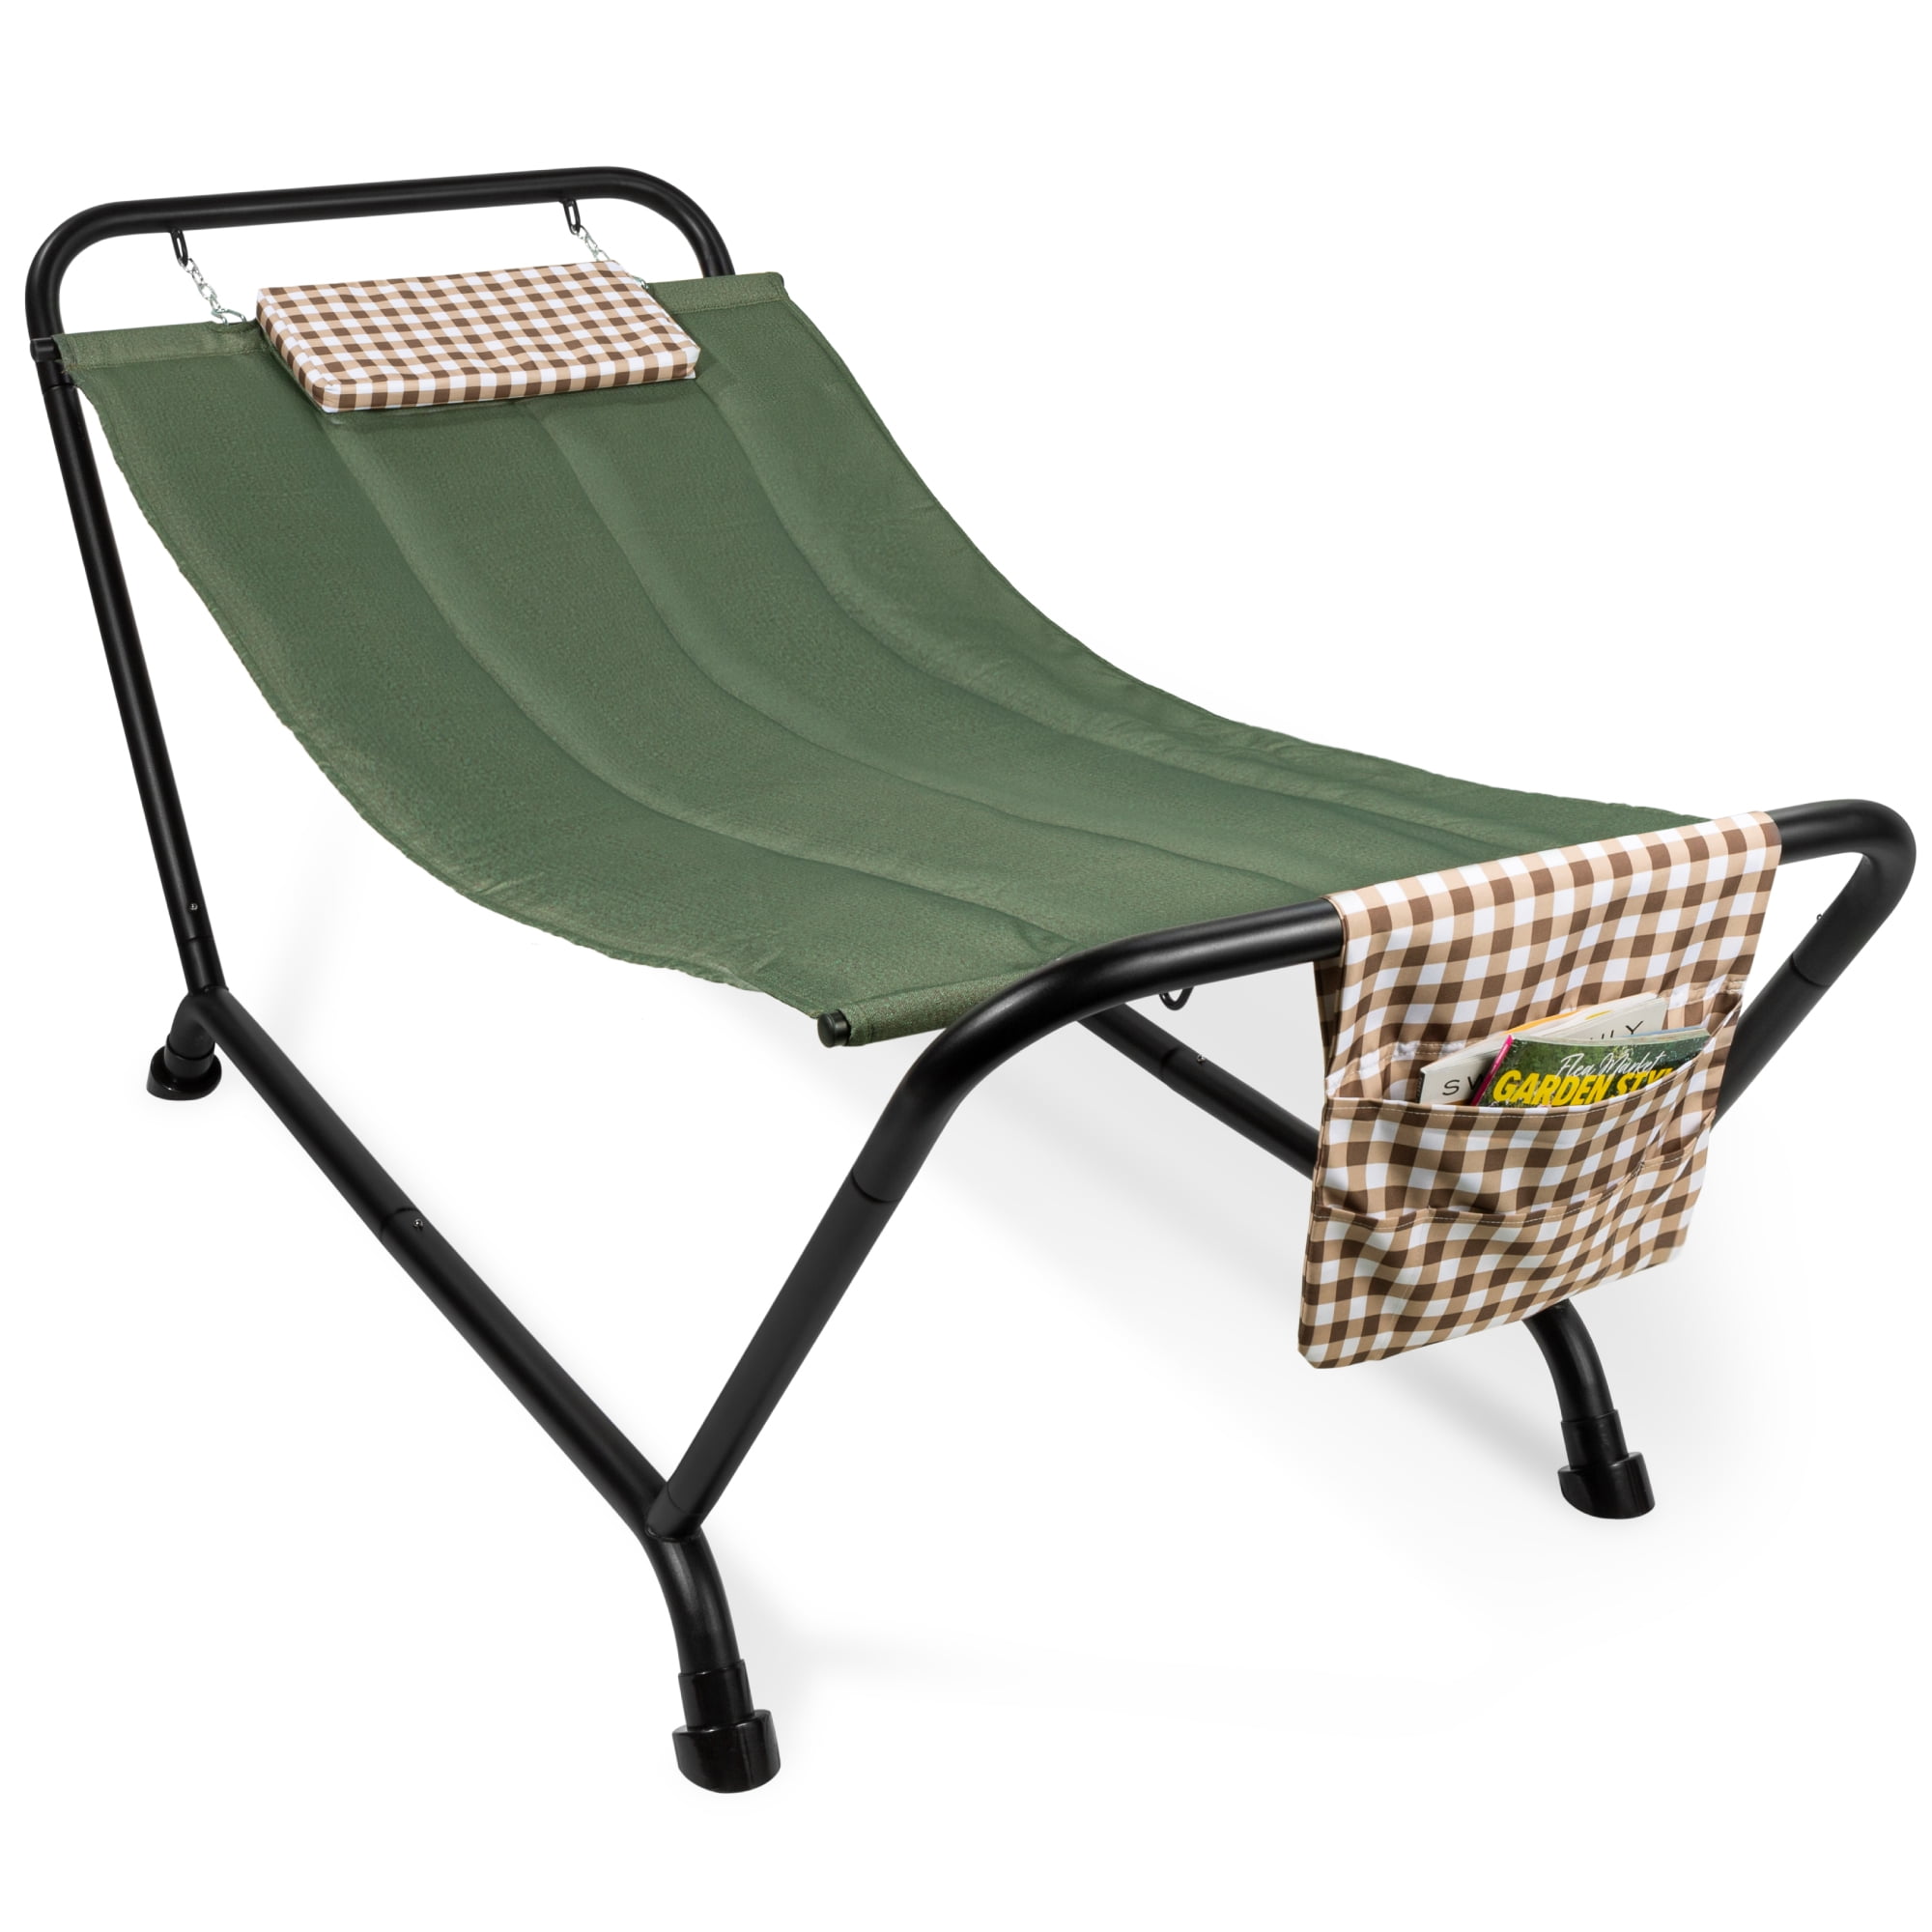 2 Person Hammock Quilted Sleeping Bed Camping Double w/ Pillow Heavy Duty. Details about   New 